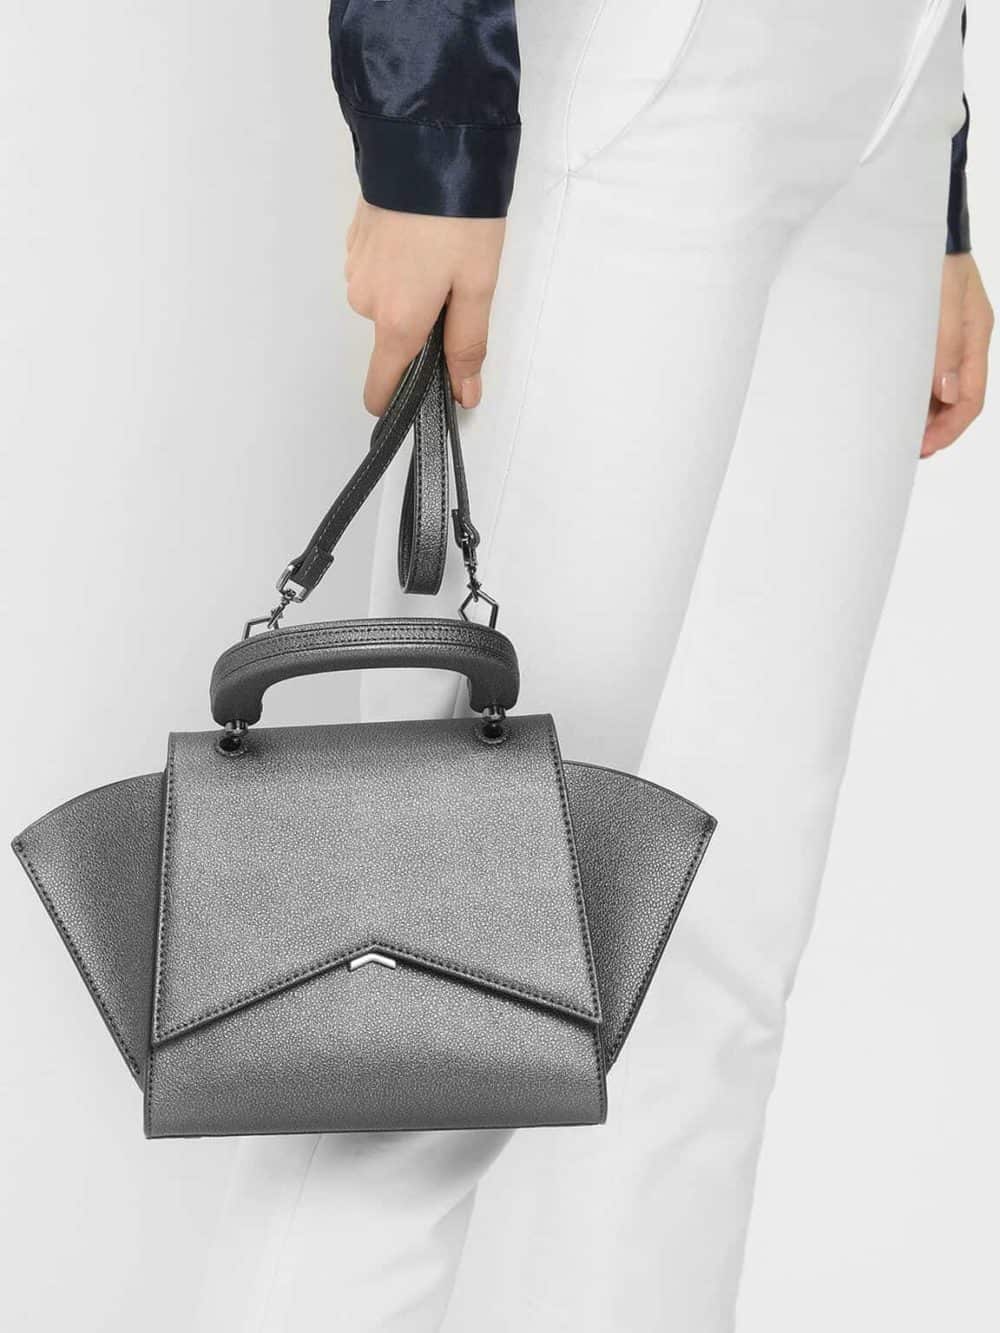 Charles & Keith Geometric Structured City Bag - BLGT